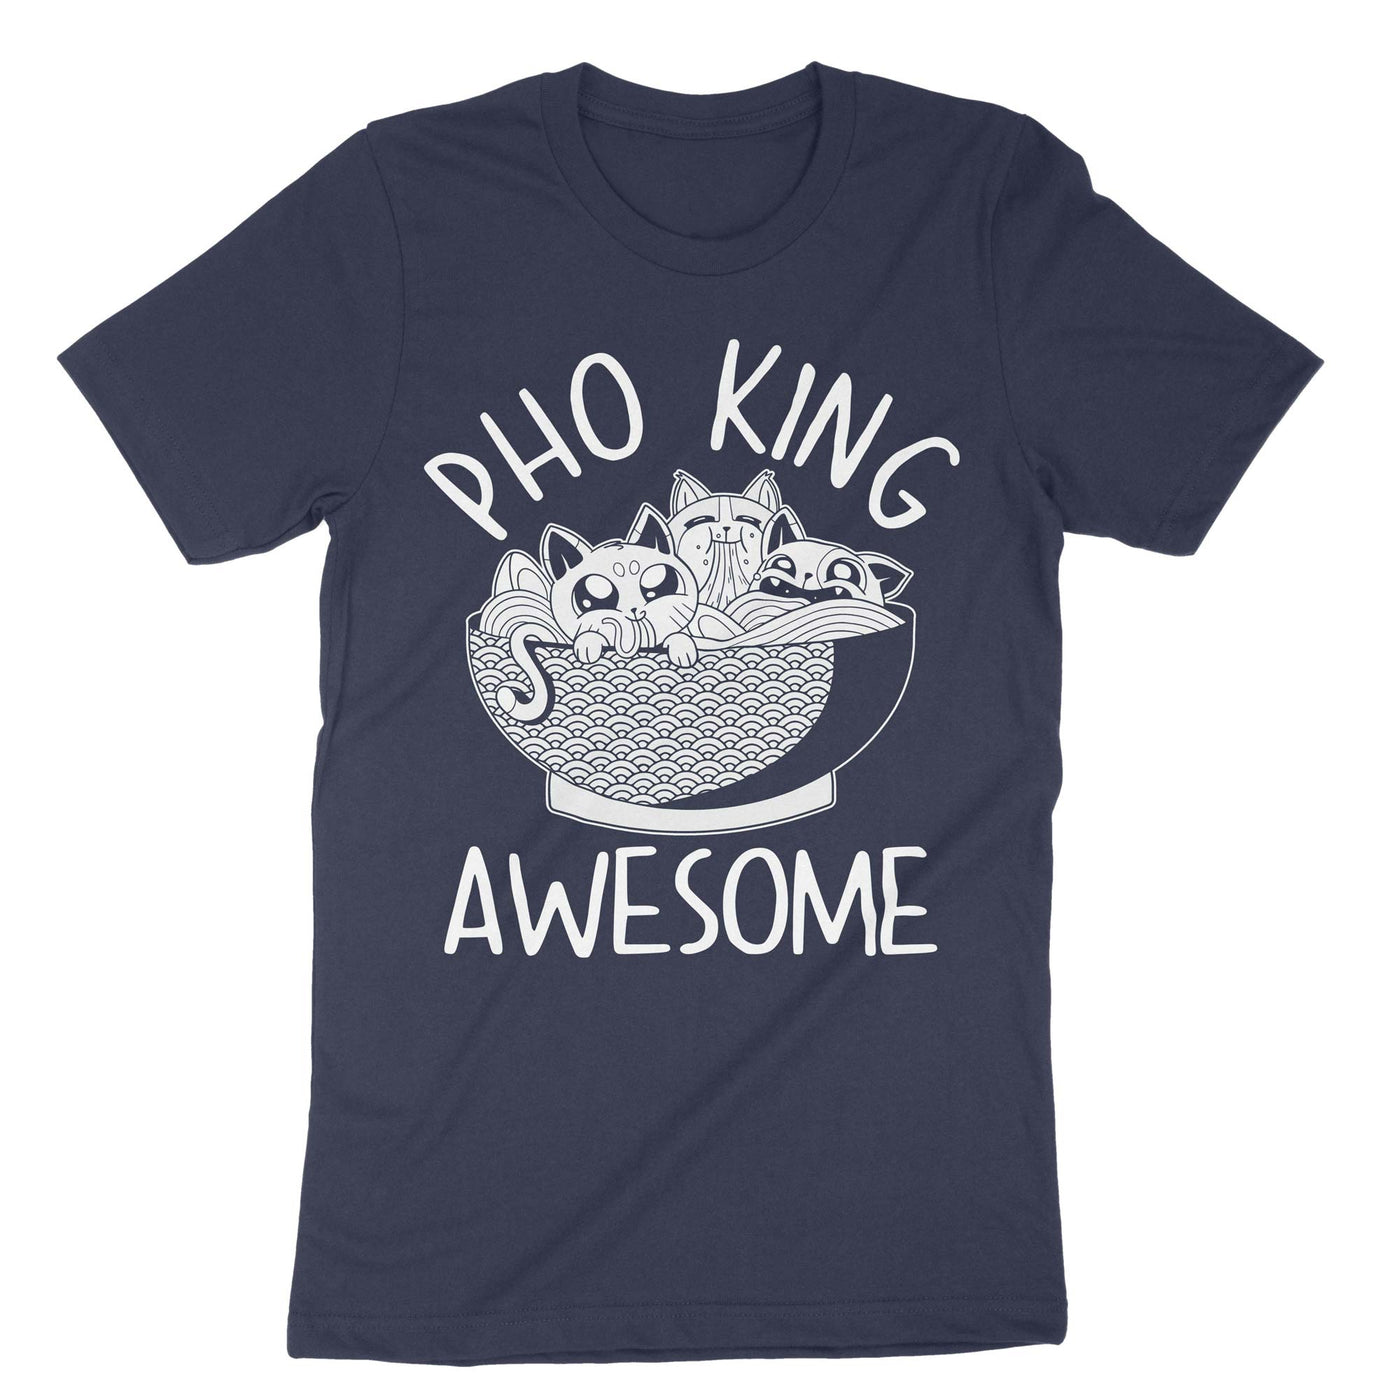 Navy Pho King Awesome T-Shirt#color_navy